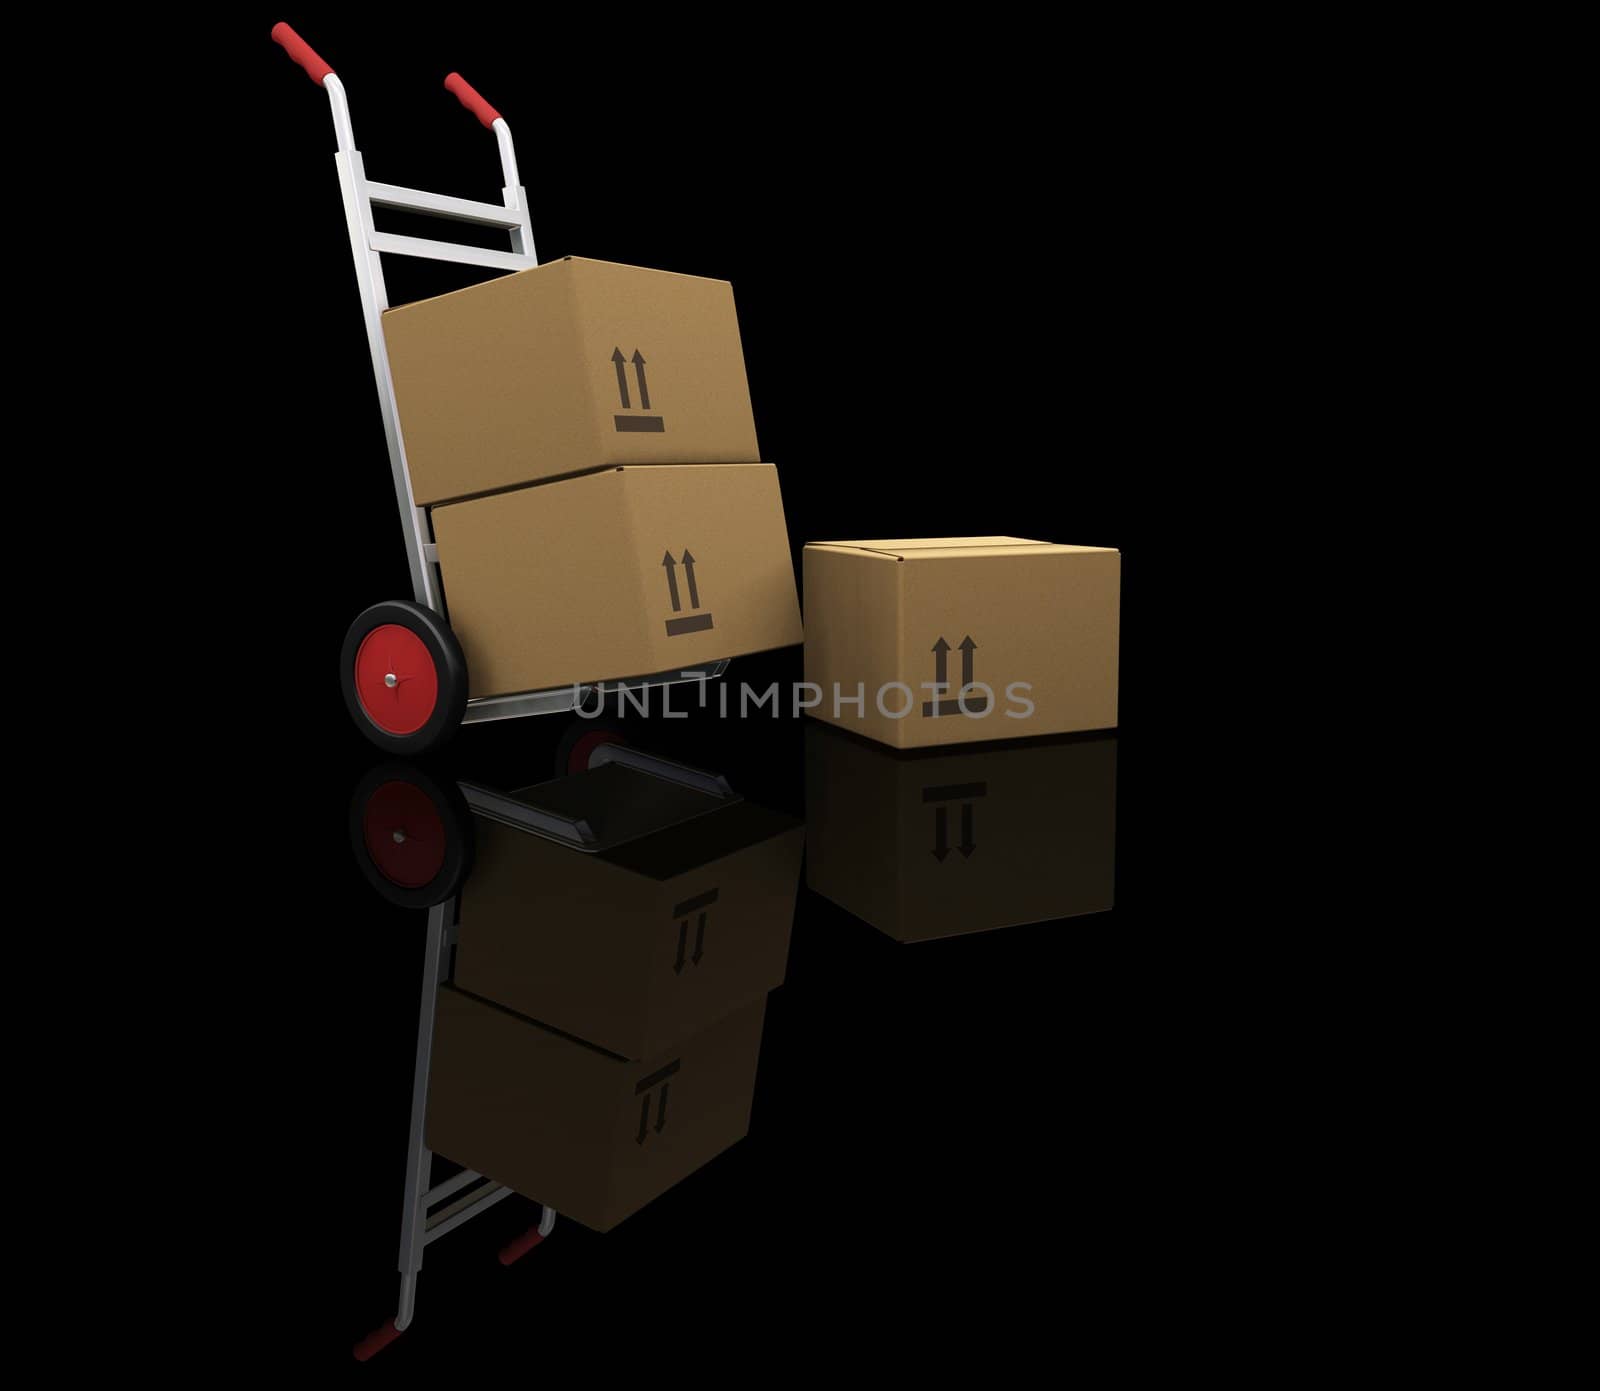 Hand truck with boxes by kjpargeter